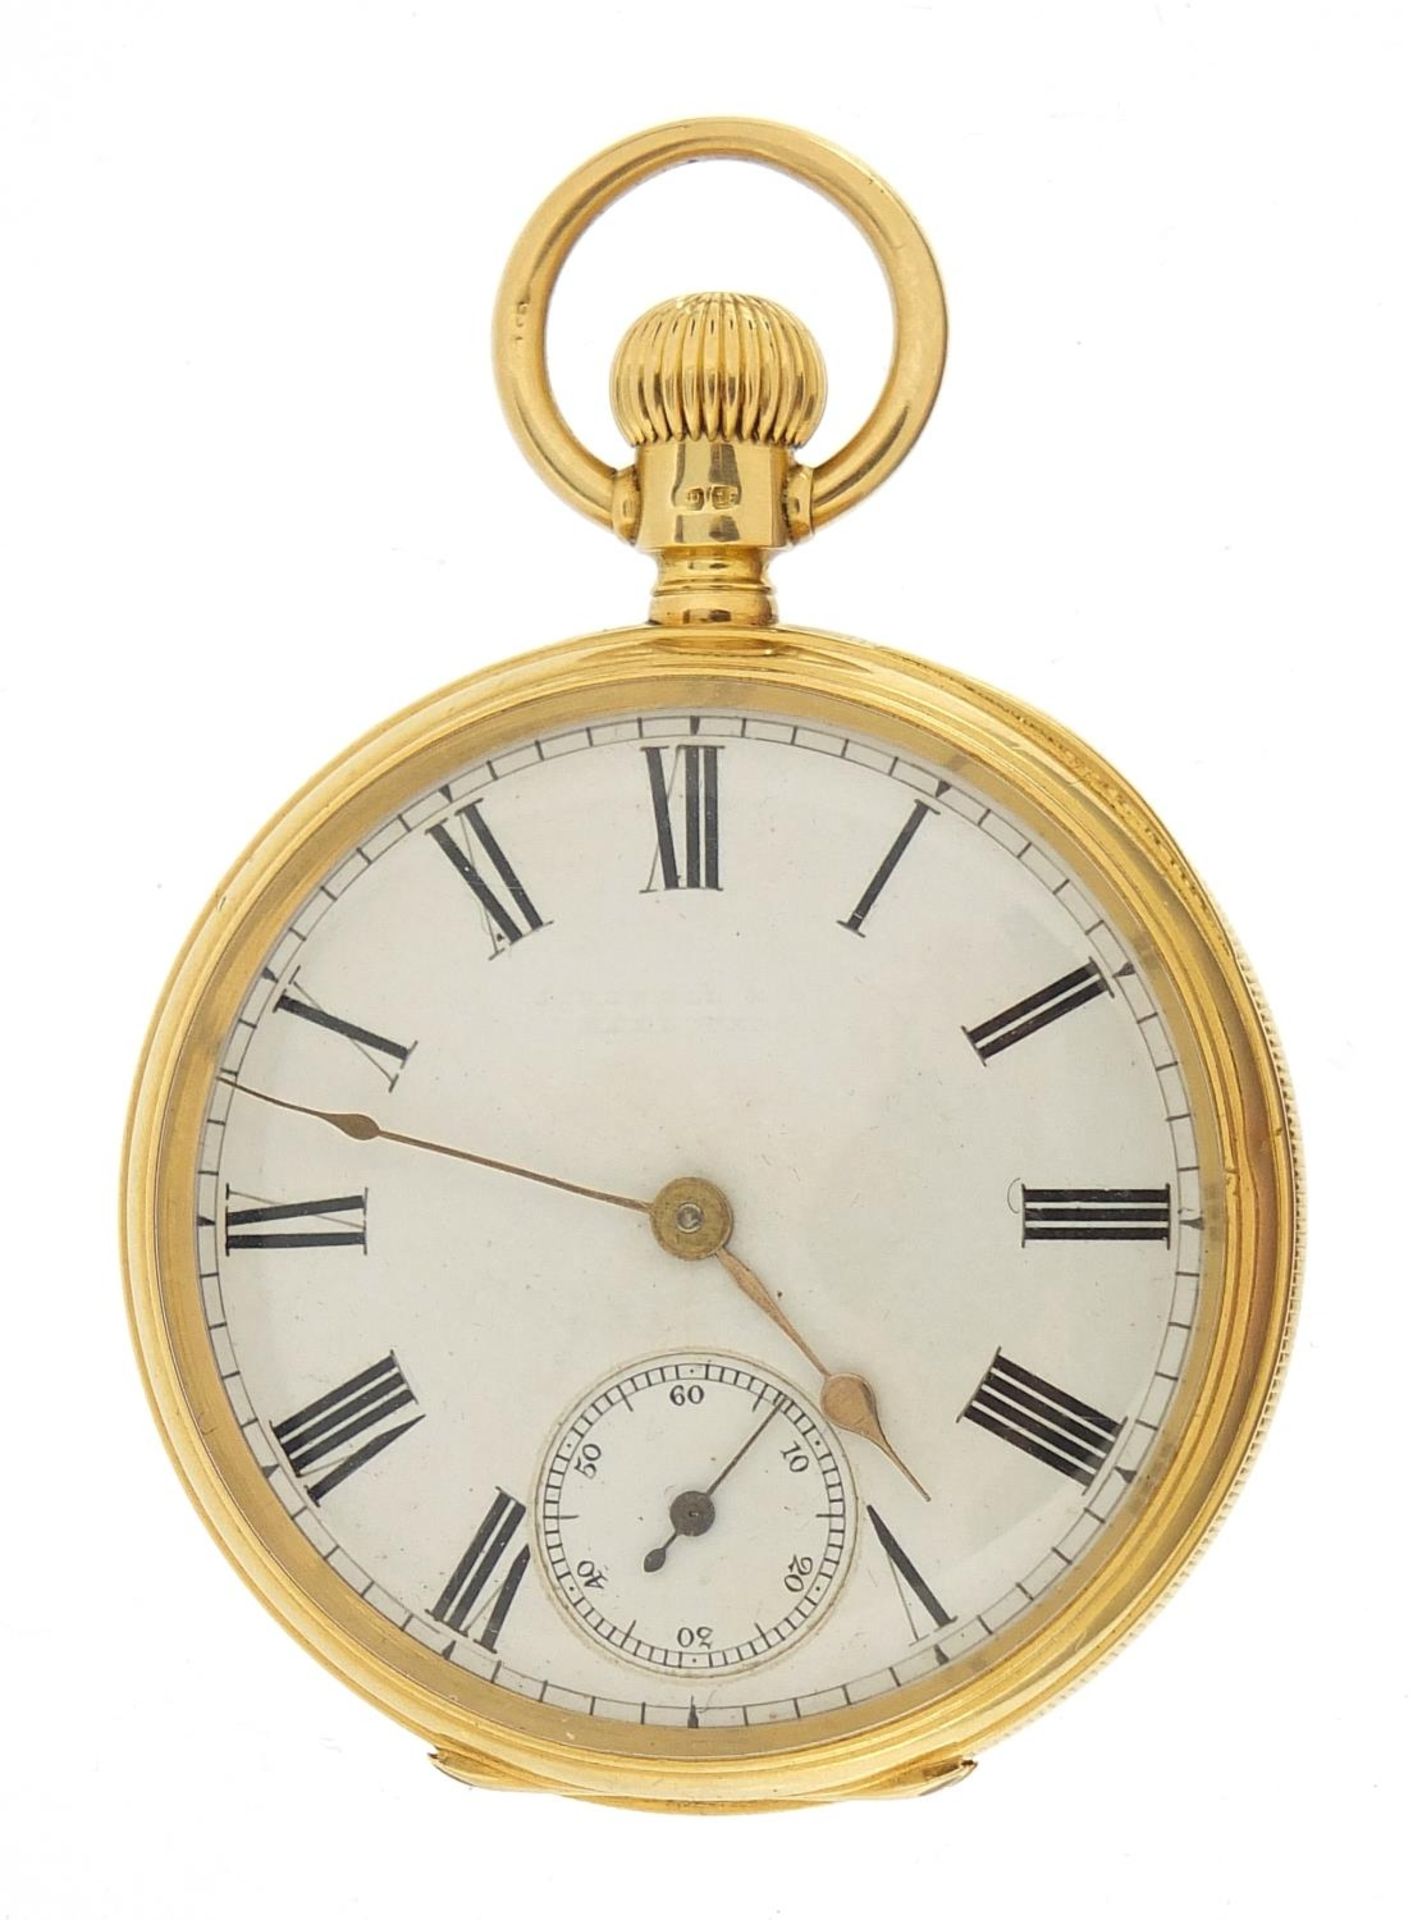 Waltham Mass, gentlemen's 18ct gold open face pocket watch with enamelled dial, the movement